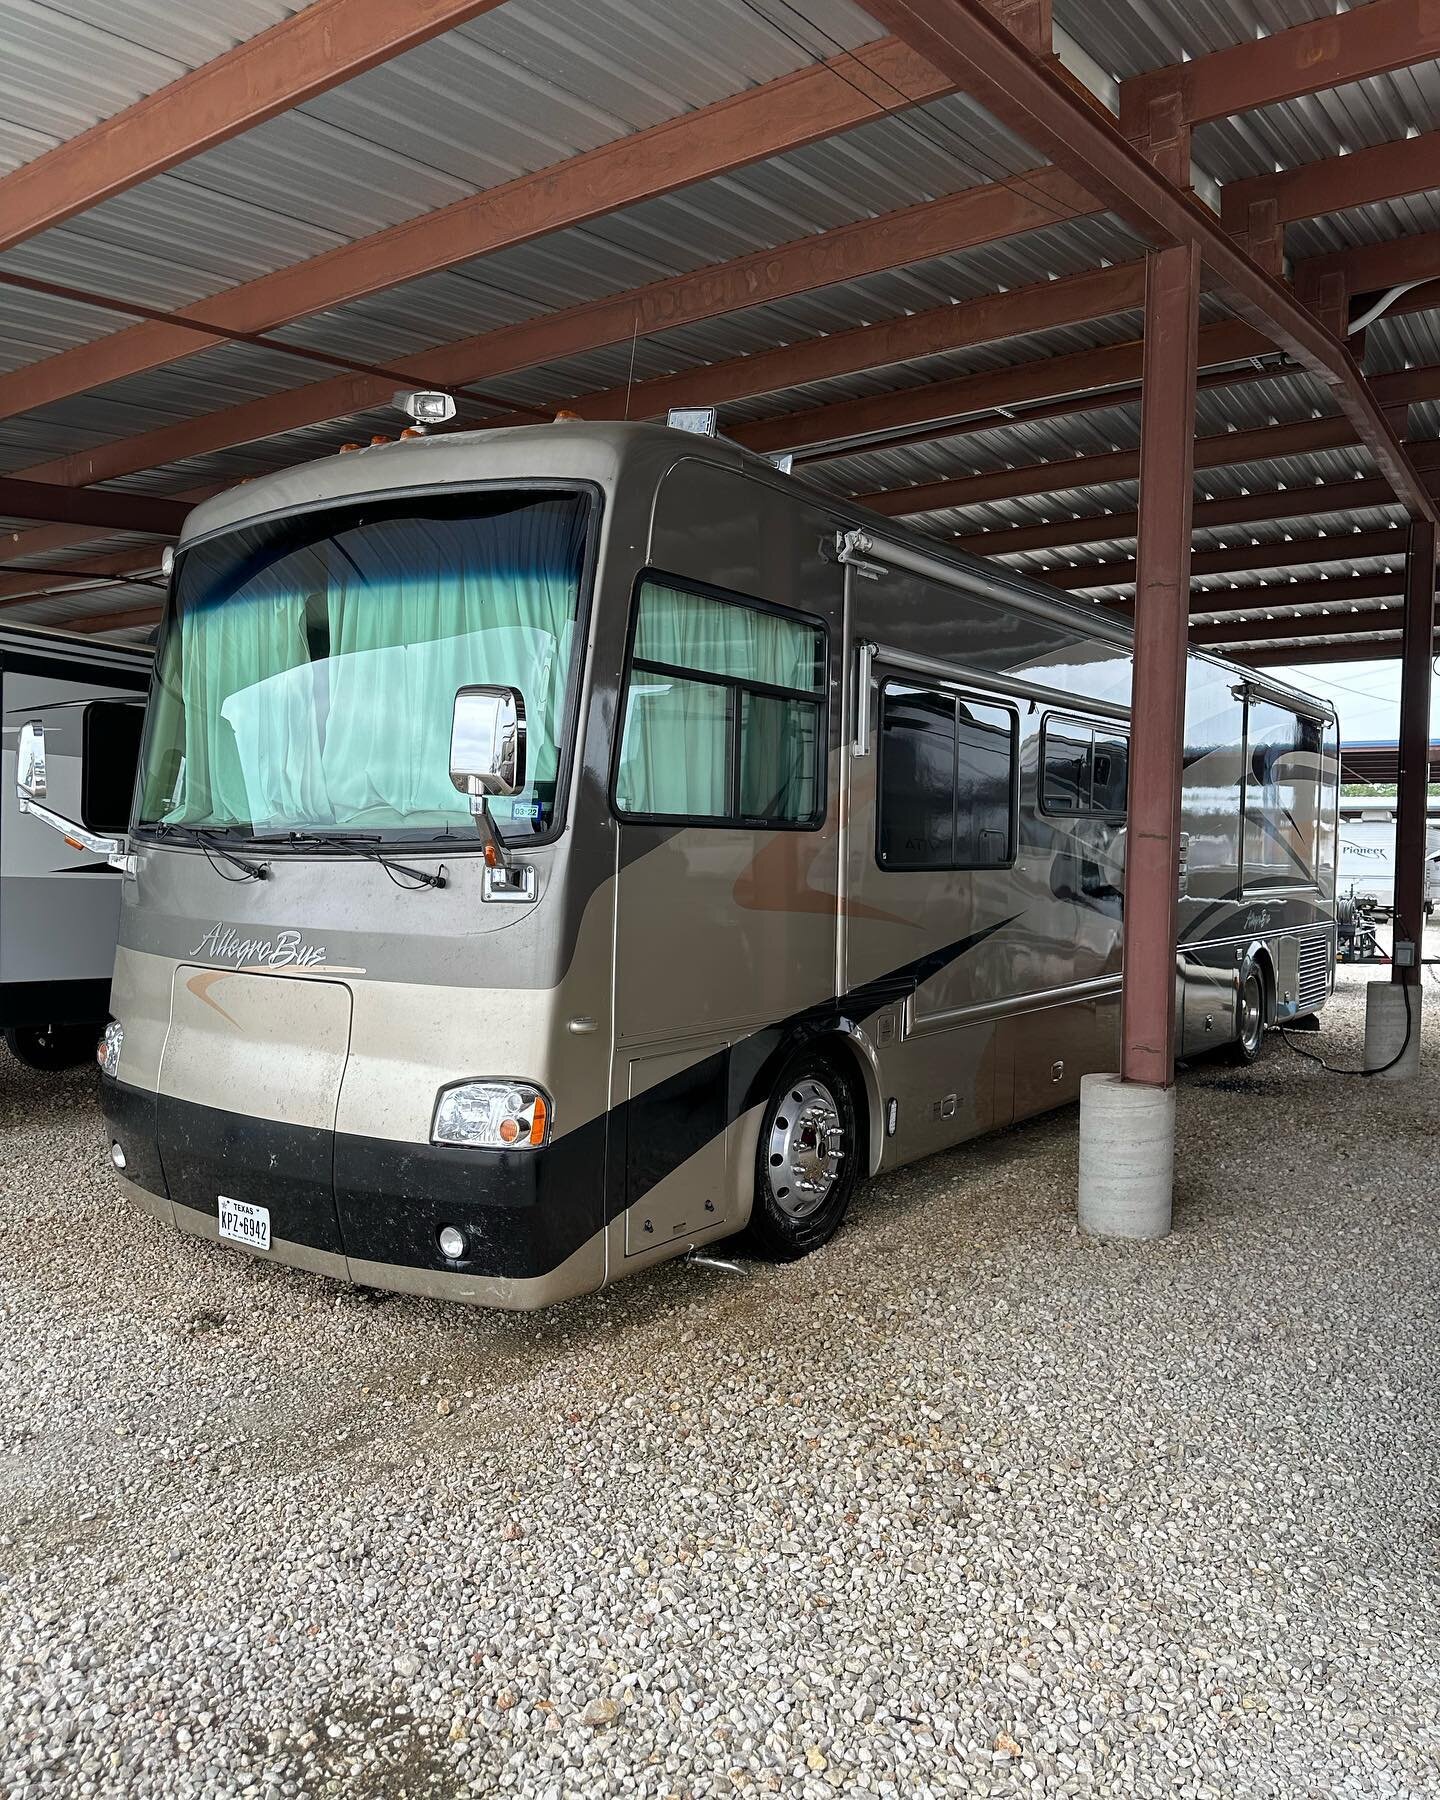 A Tiffin Class-A gets the first class treatment and shines bright! Wash &amp; Wax service complete ✔️
.
.
#washandwax #austinrvdetailing #austindetailing #texasmobilervspa #lakewaytexas #laketravis #atxrvdetailing #austinrvlife #austinrvparks #laketr